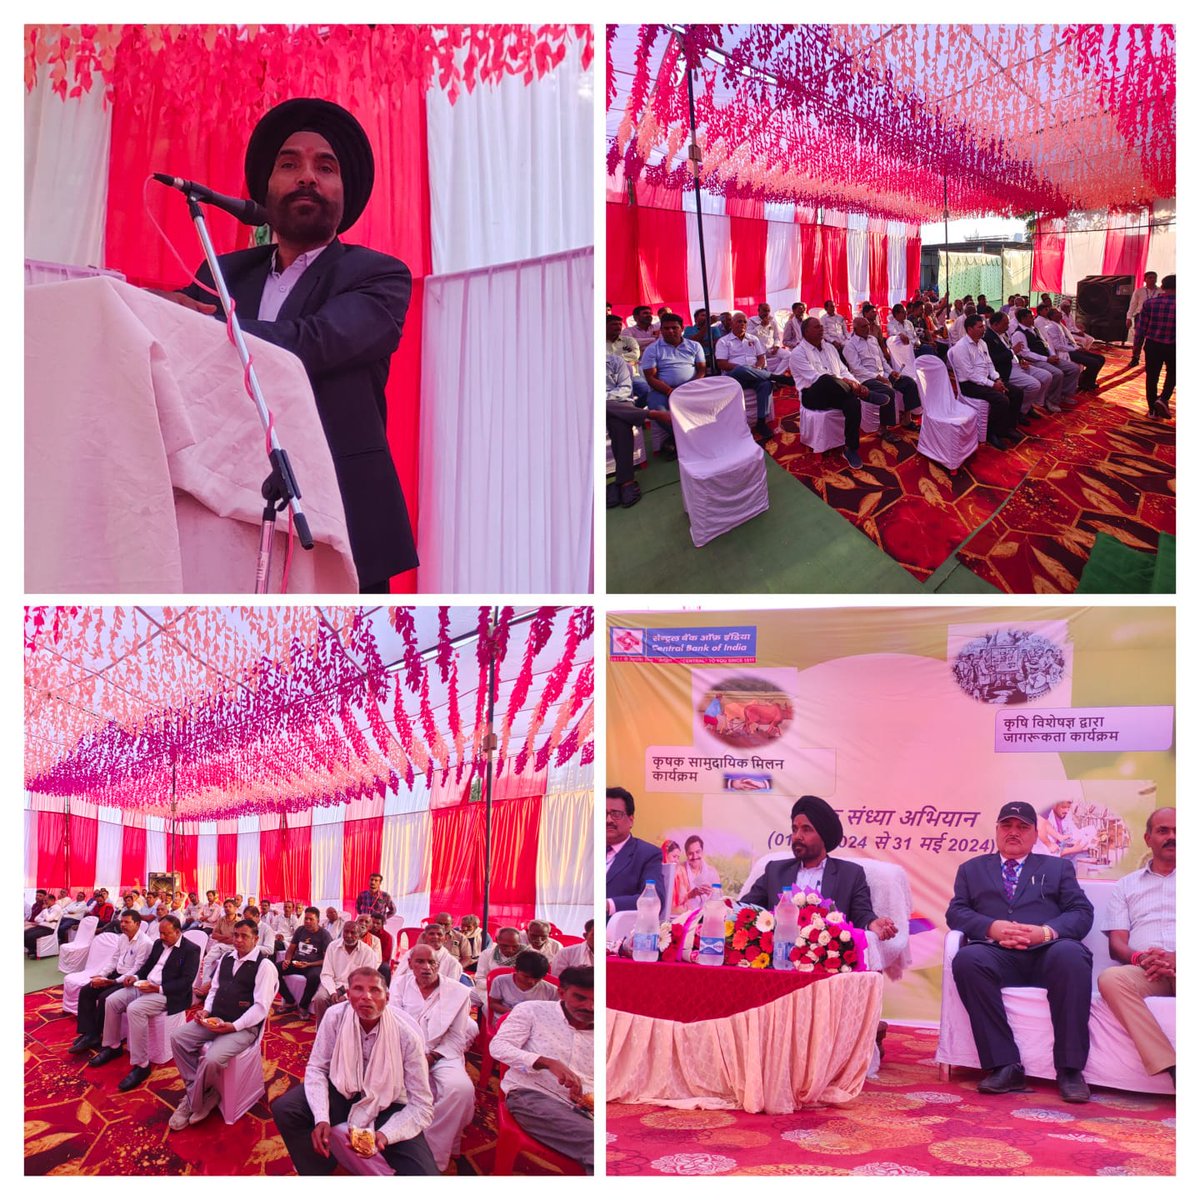 Krishak Sandhya Camp organized by @centralbank_in in Dolariya, Madhya Pradesh, was held in the presence of Zonal Head Mr. Tarsem Singh Zira. The event featured a question and answer session with farmers. 

#agrigoi #farmers #AIF #eNAM #organicfarming #millets #horticulture